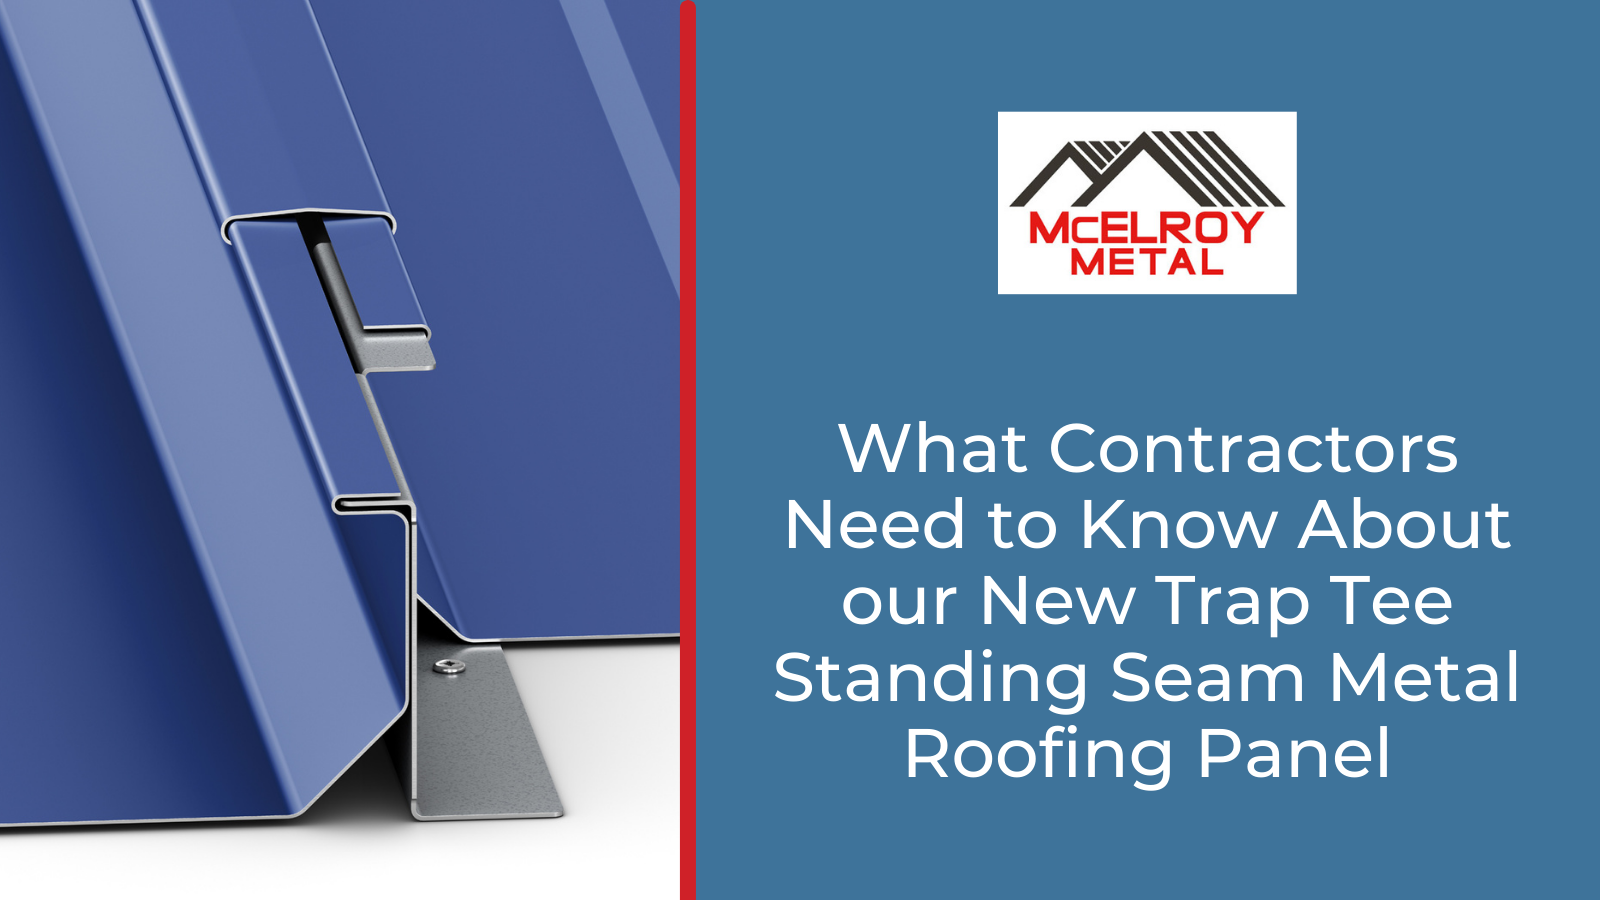 What Contractors Need to Know About our New Trap Tee Standing Seam Metal Roofing Panel